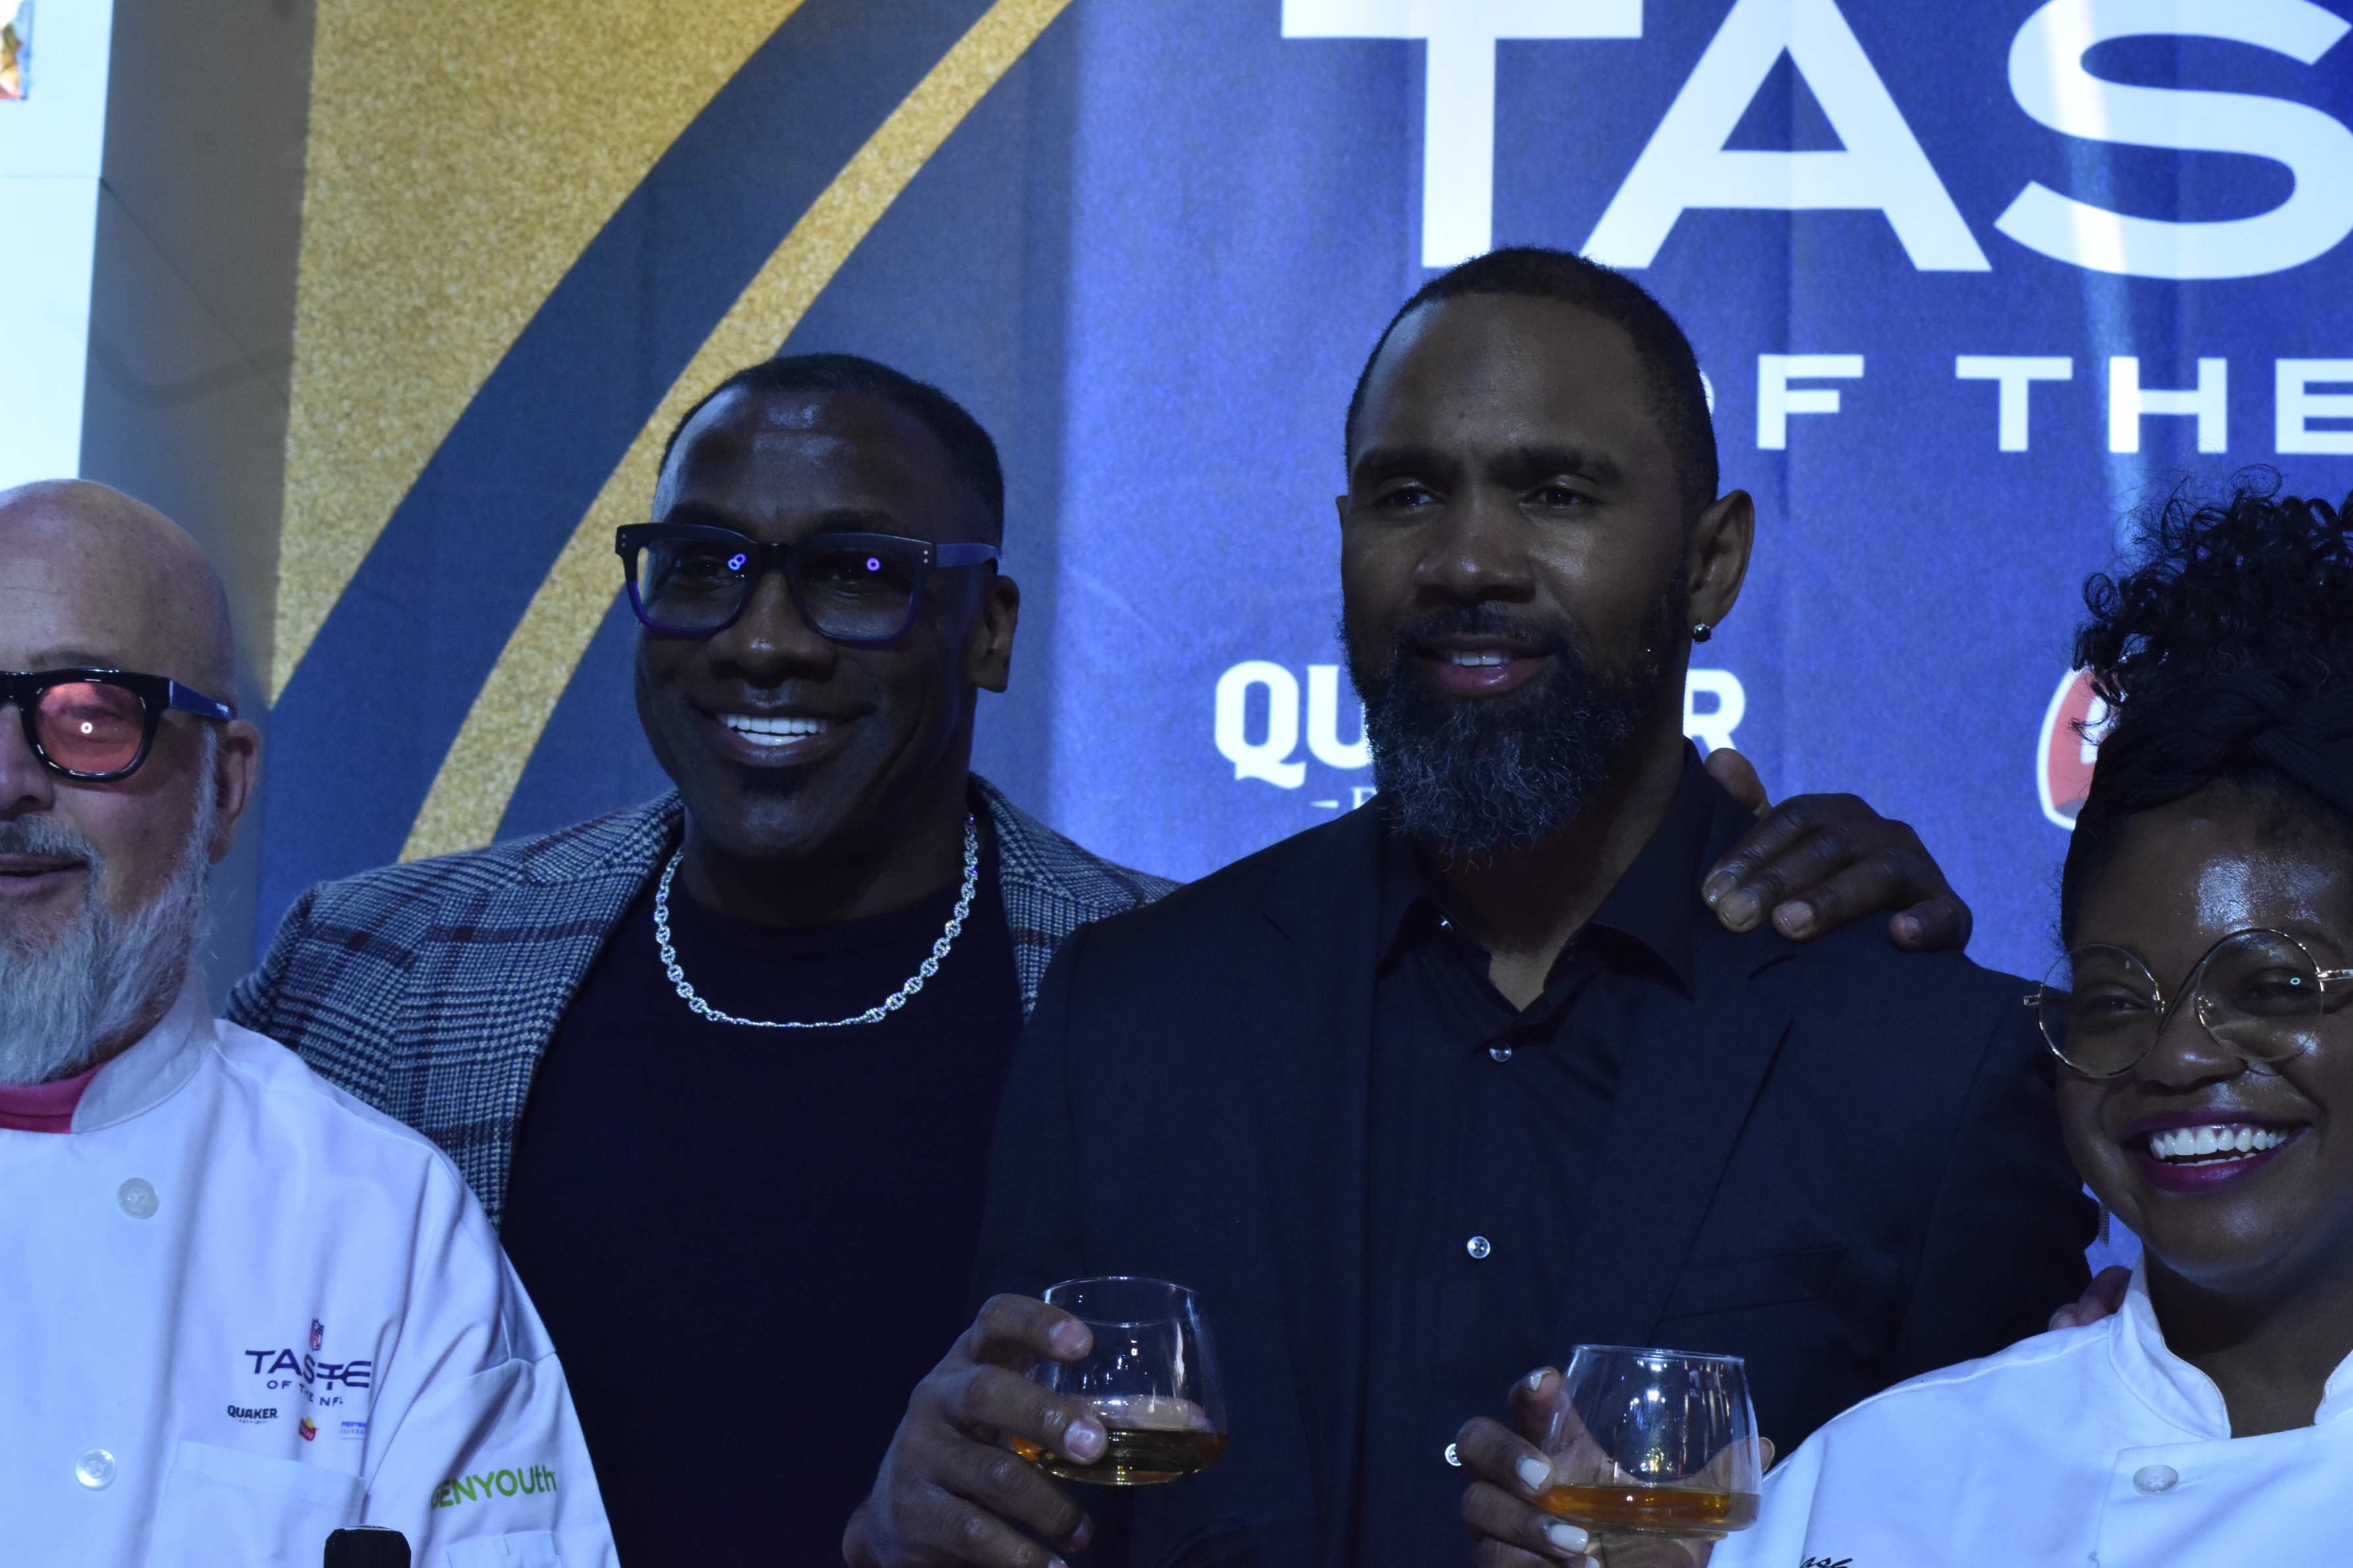 Celeb athletes and chefs holding drinks at a tasting event